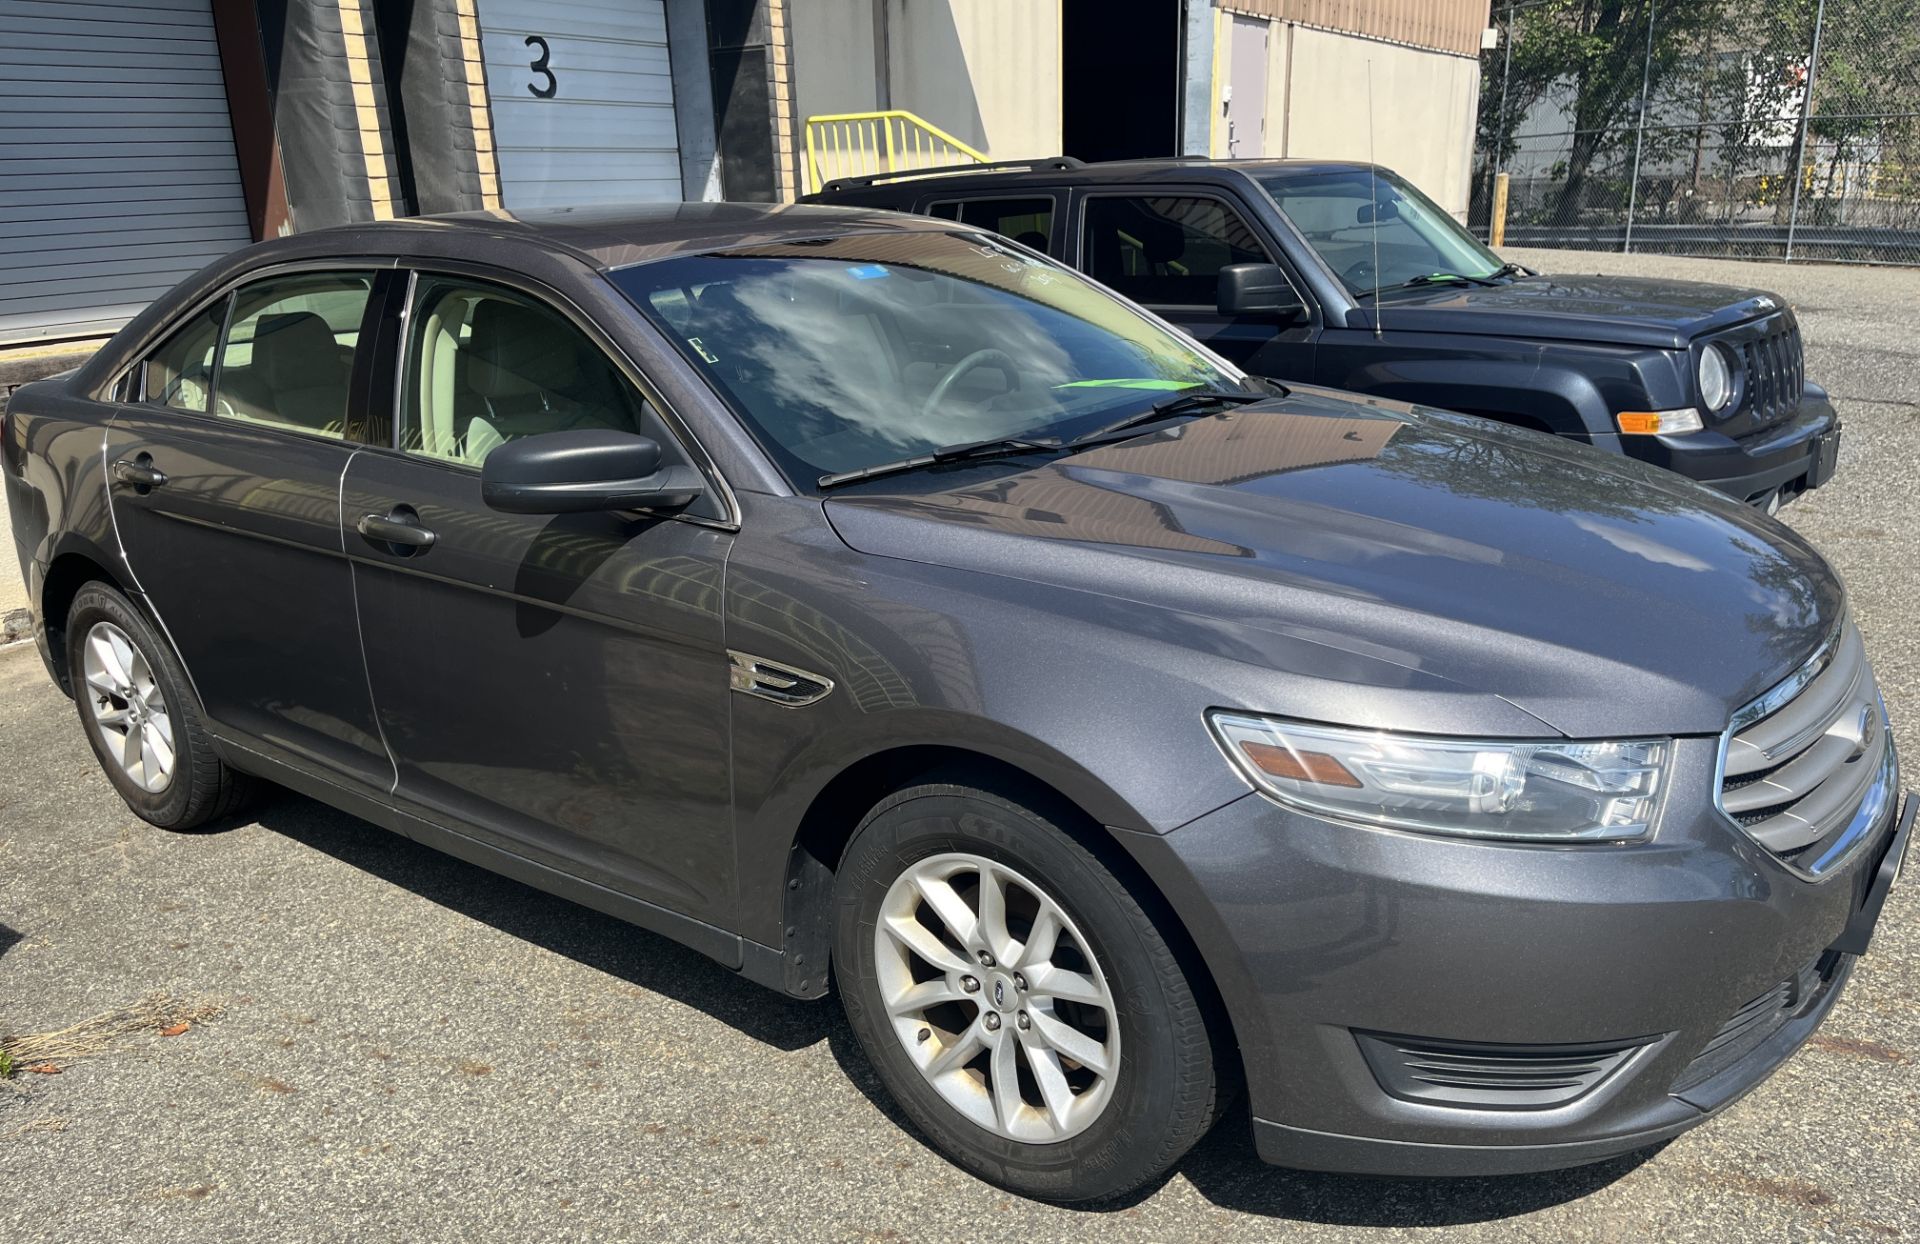 2013 Ford Taurus, VIN: 1FAHP2081DG188718, 60,964 Miles, with Keys, Starts - Image 3 of 8